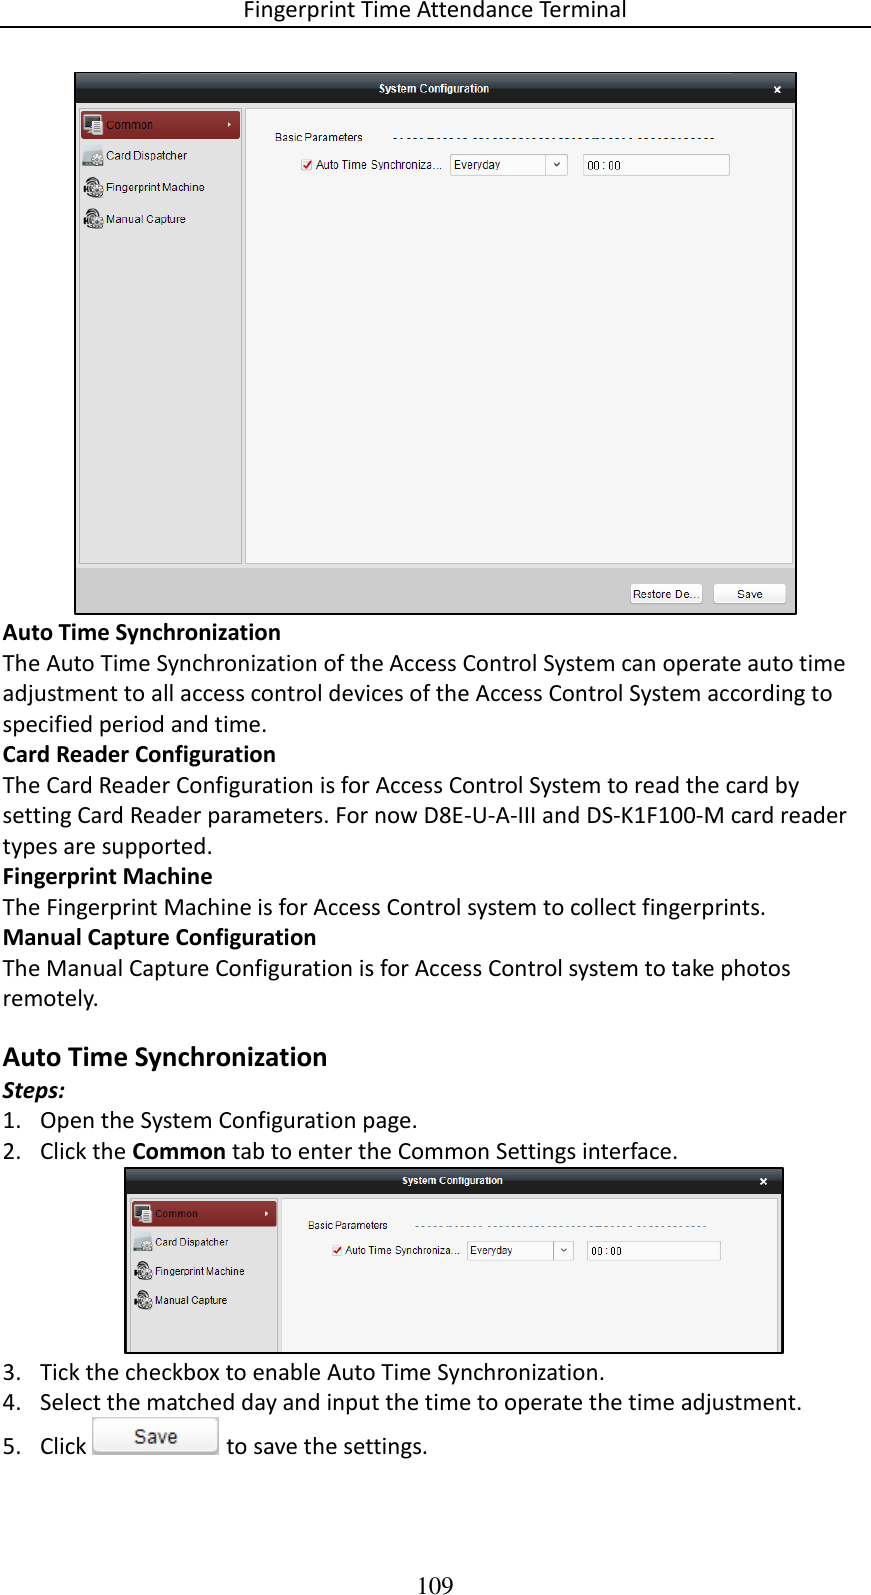 Fingerprint Time Attendance Terminal 109  Auto Time Synchronization The Auto Time Synchronization of the Access Control System can operate auto time adjustment to all access control devices of the Access Control System according to specified period and time. Card Reader Configuration The Card Reader Configuration is for Access Control System to read the card by setting Card Reader parameters. For now D8E-U-A-III and DS-K1F100-M card reader types are supported. Fingerprint Machine The Fingerprint Machine is for Access Control system to collect fingerprints.  Manual Capture Configuration The Manual Capture Configuration is for Access Control system to take photos remotely.  Auto Time Synchronization Steps: 1. Open the System Configuration page. 2. Click the Common tab to enter the Common Settings interface.  3. Tick the checkbox to enable Auto Time Synchronization. 4. Select the matched day and input the time to operate the time adjustment.  5. Click   to save the settings. 